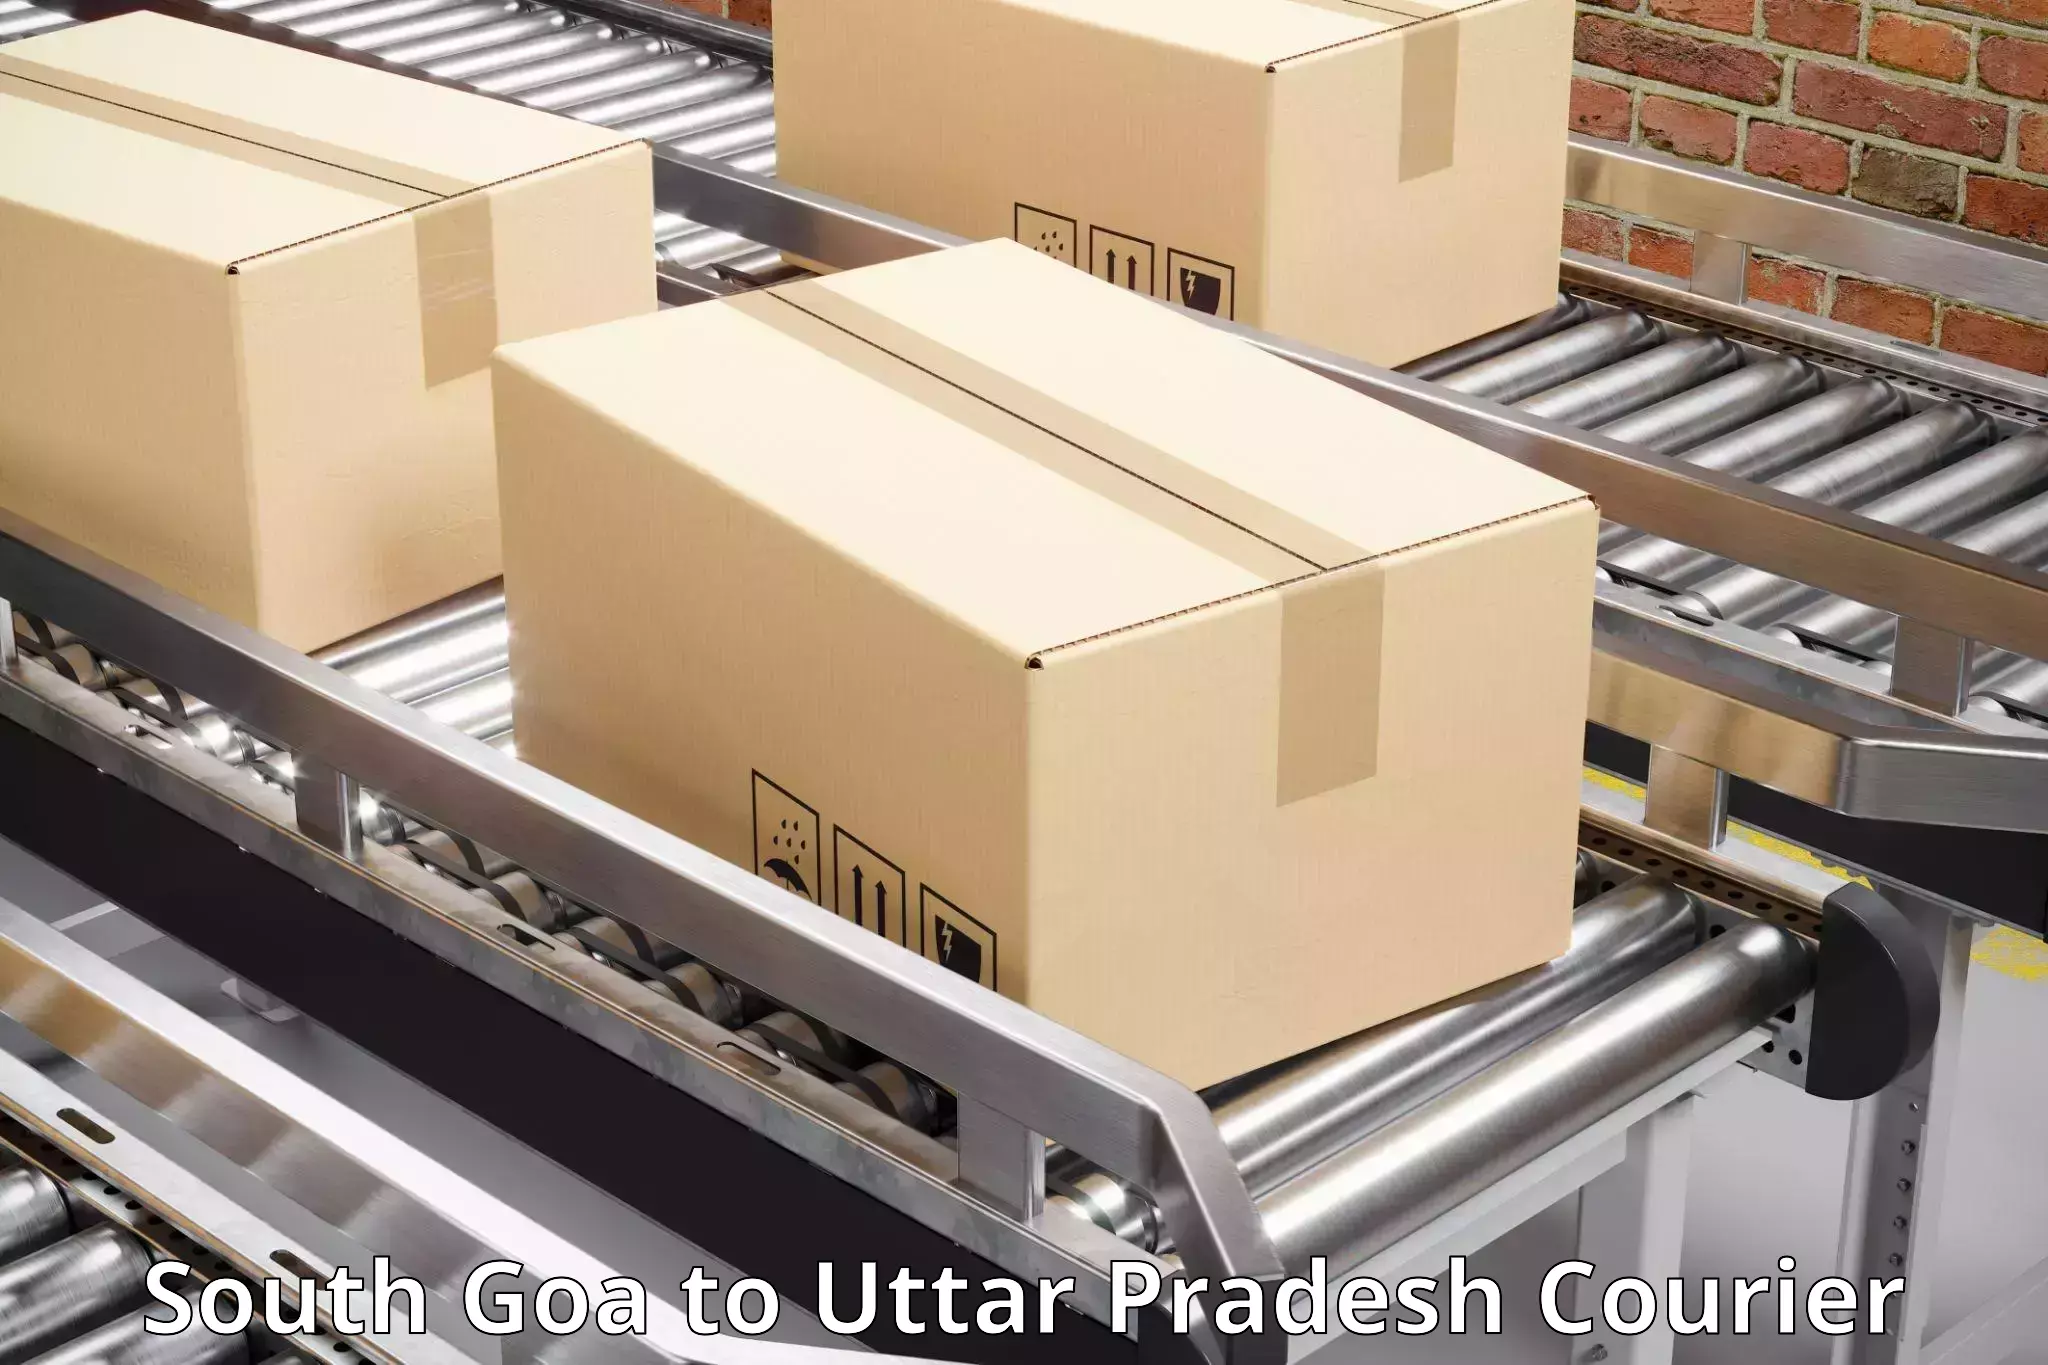 Courier service efficiency South Goa to Afzalgarh